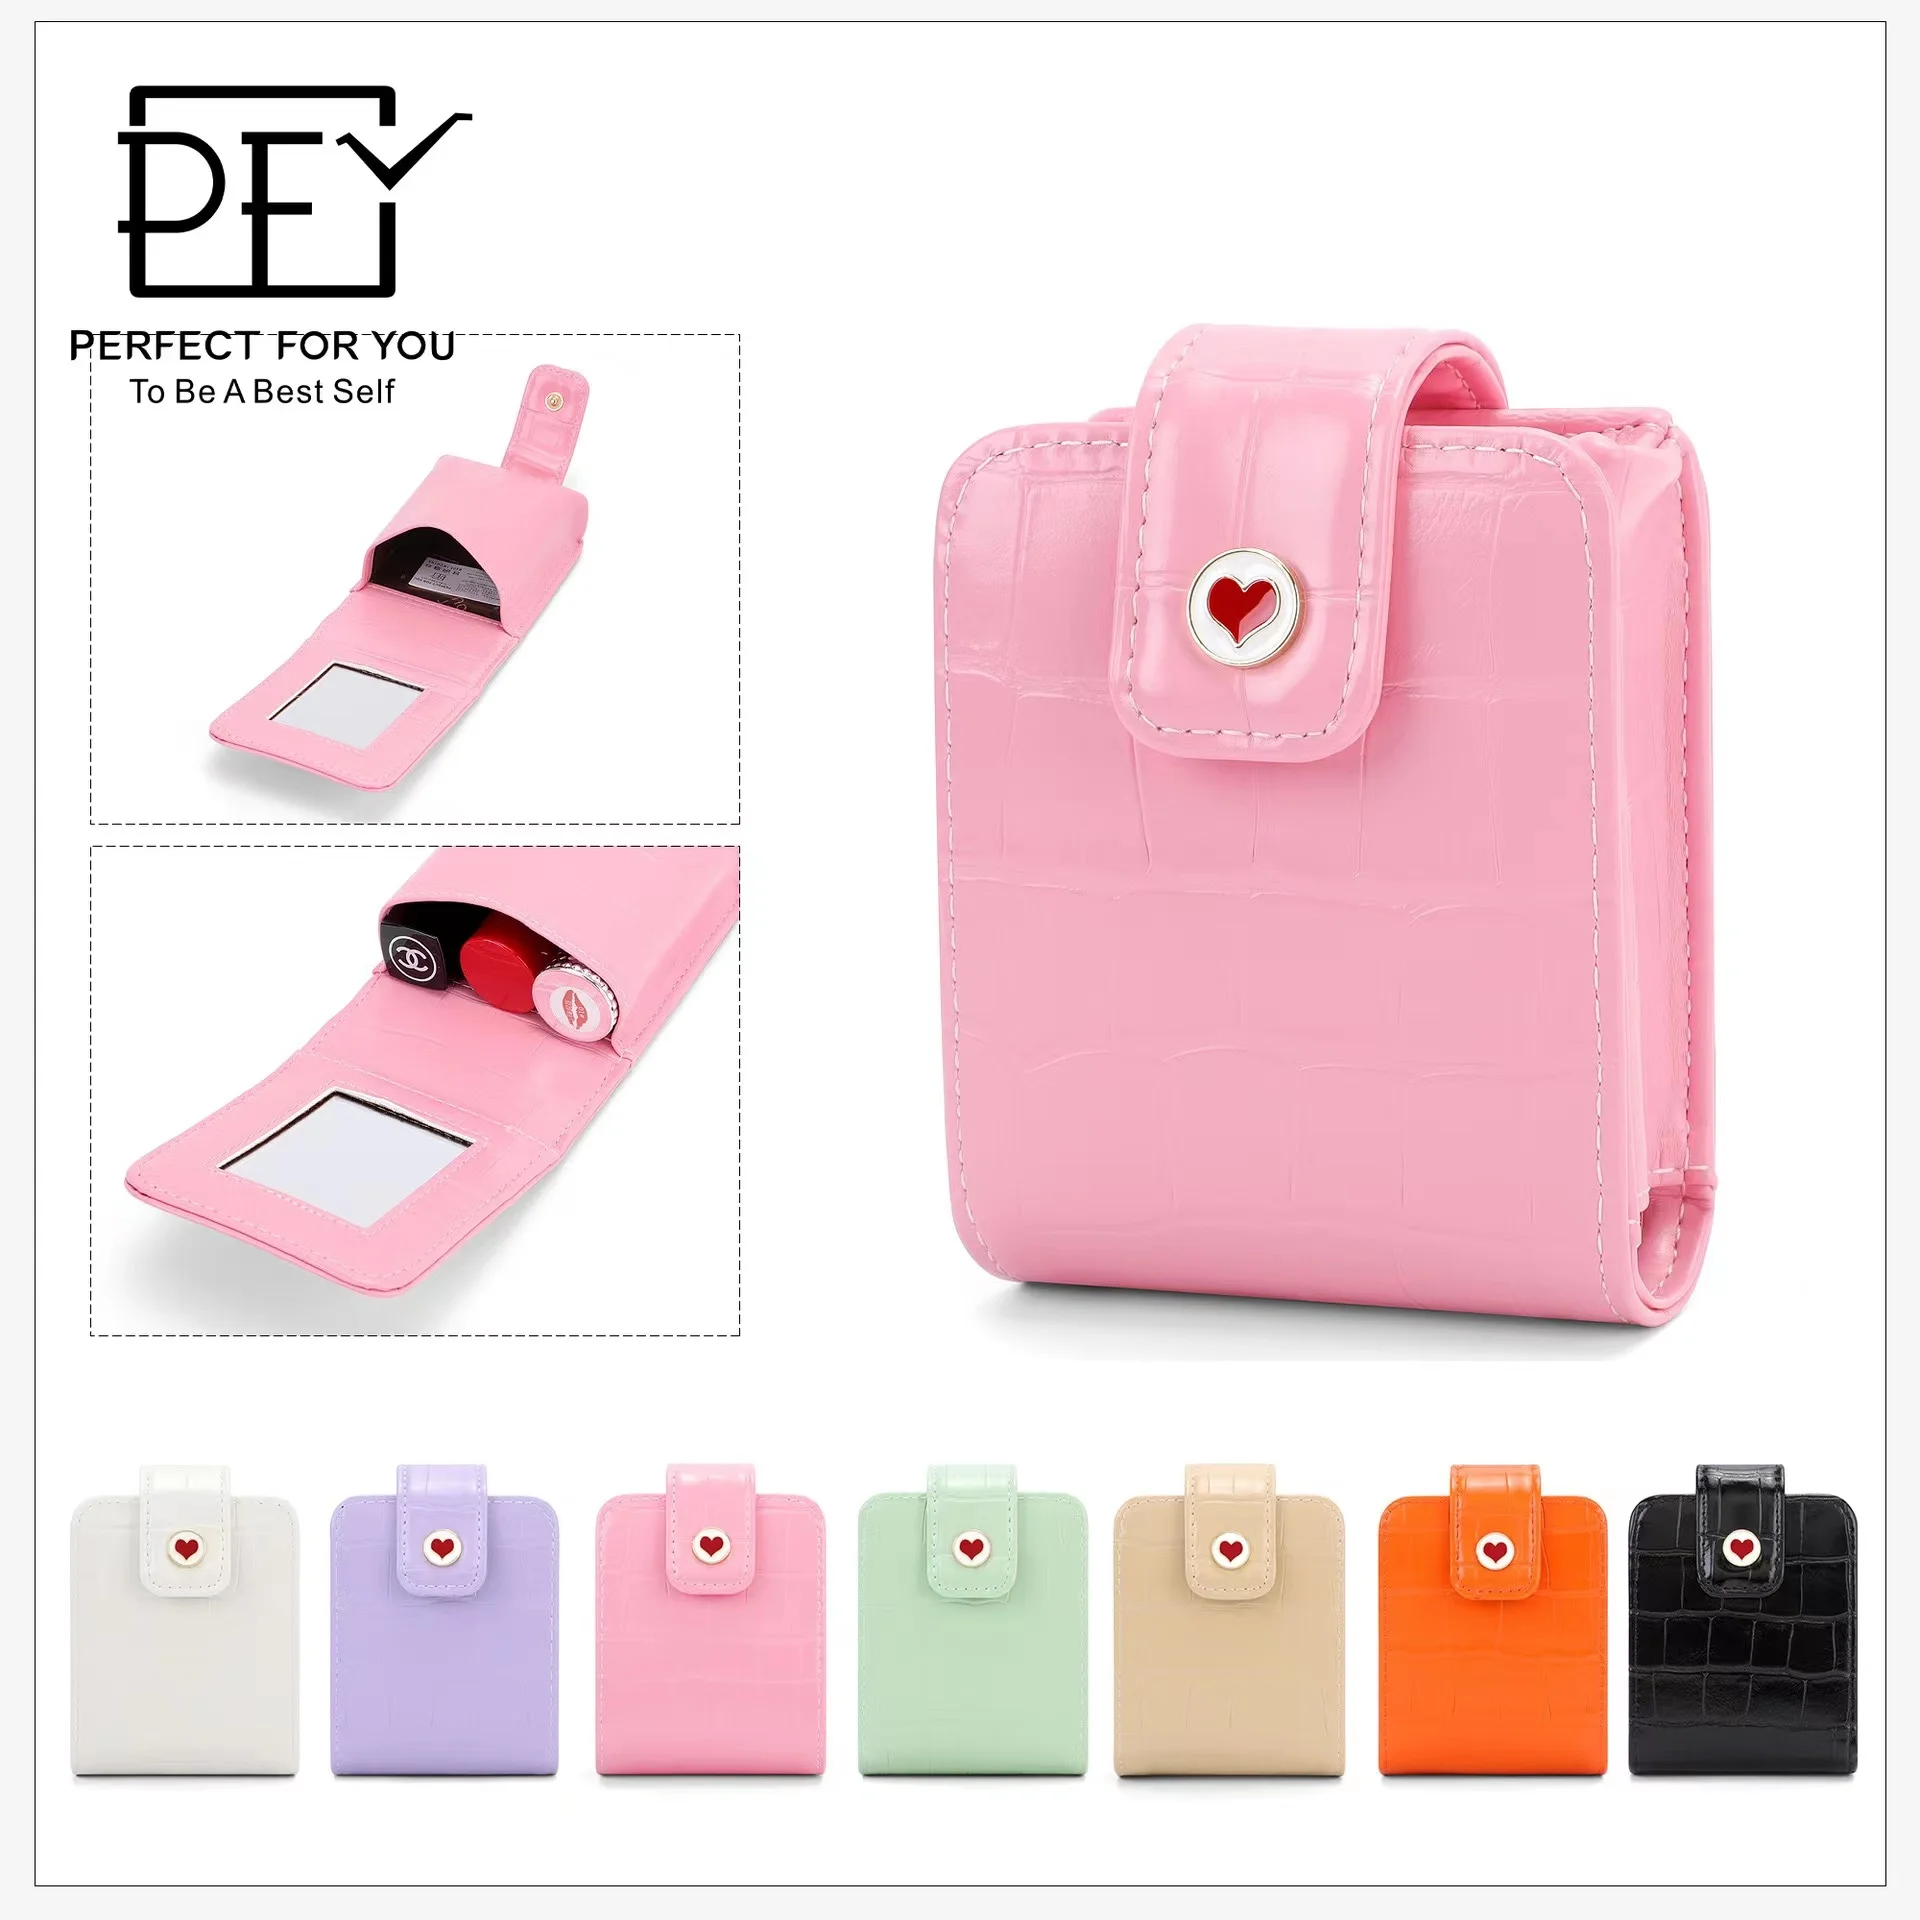 Portable portable cosmetic bag ladies fashion ideas with makeup mirror red envelopes